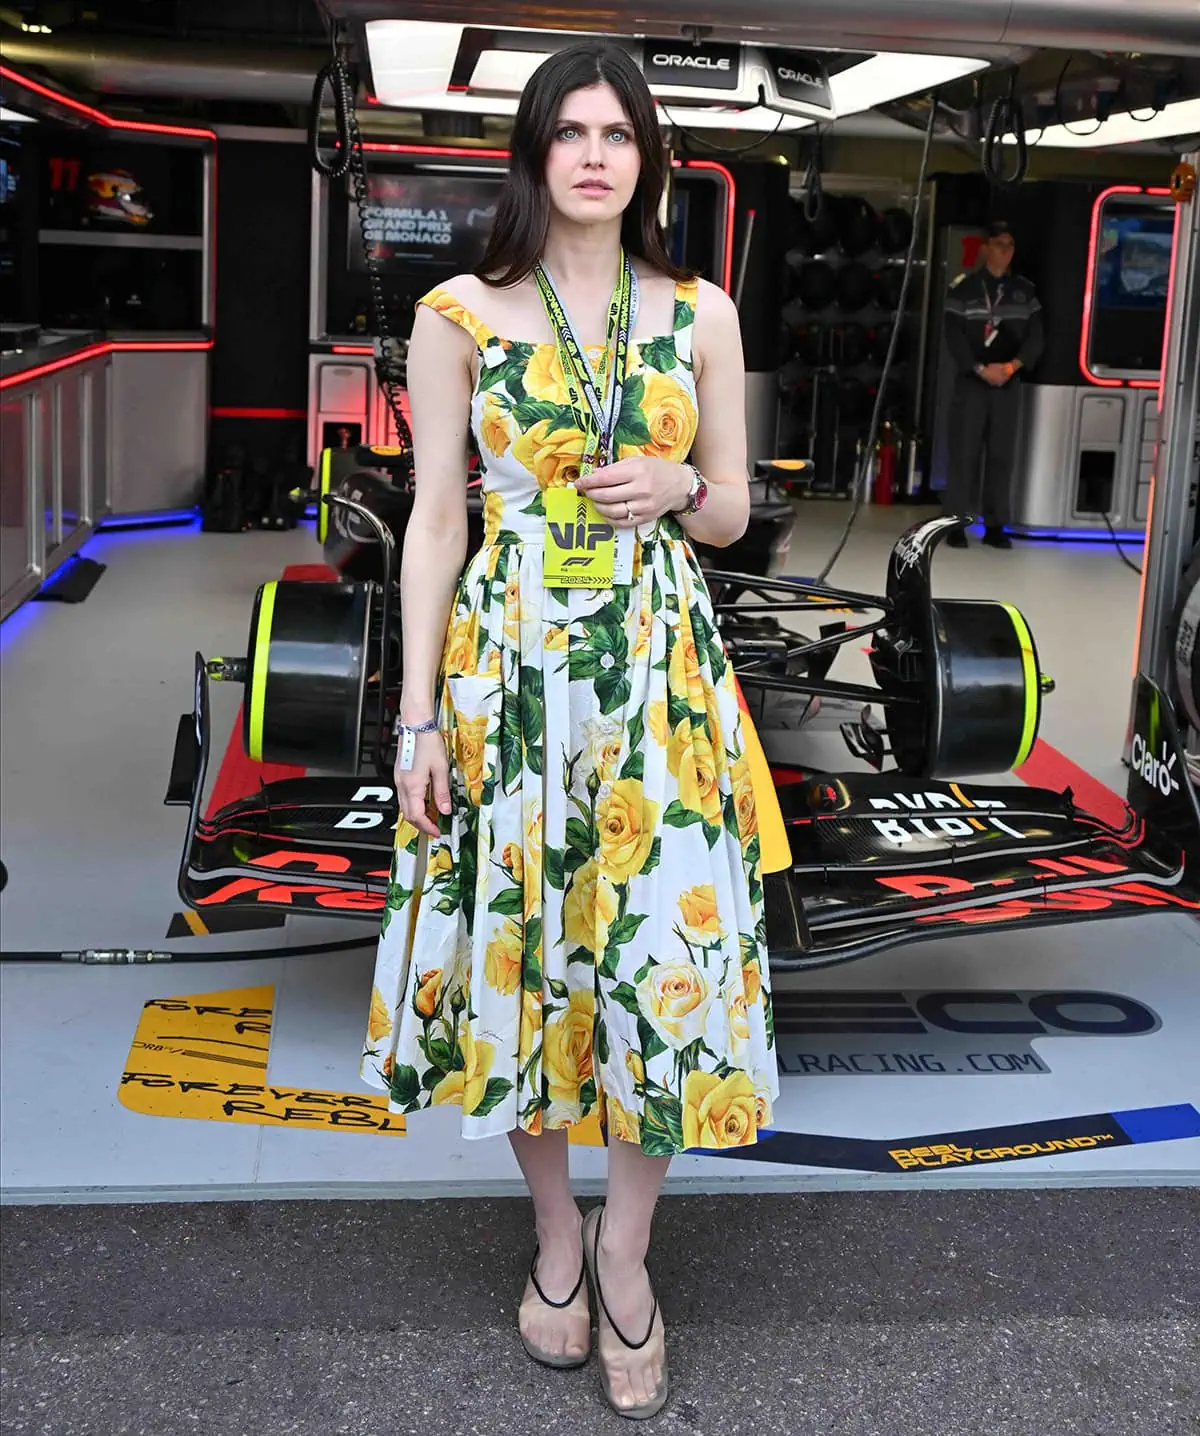 Alexandra Daddario's Dolce & Gabbana floral dress features front buttons and a pleated midi skirt, making it a perfect summertime dress